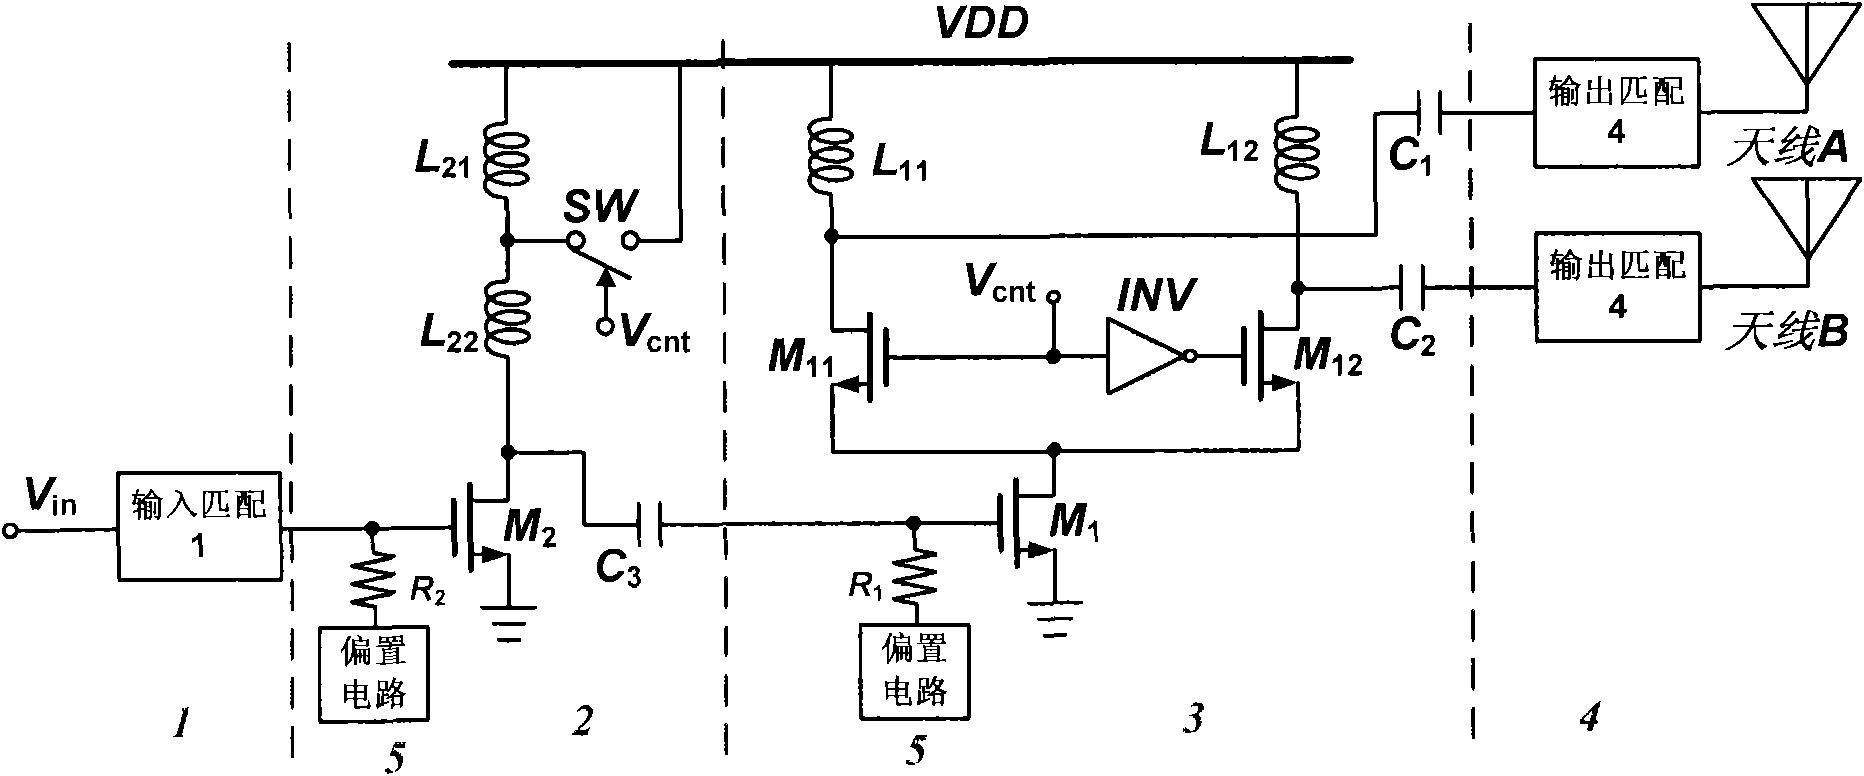 Power amplifier circuit with reconfigurable frequency band in multi-band wireless mobile communication system